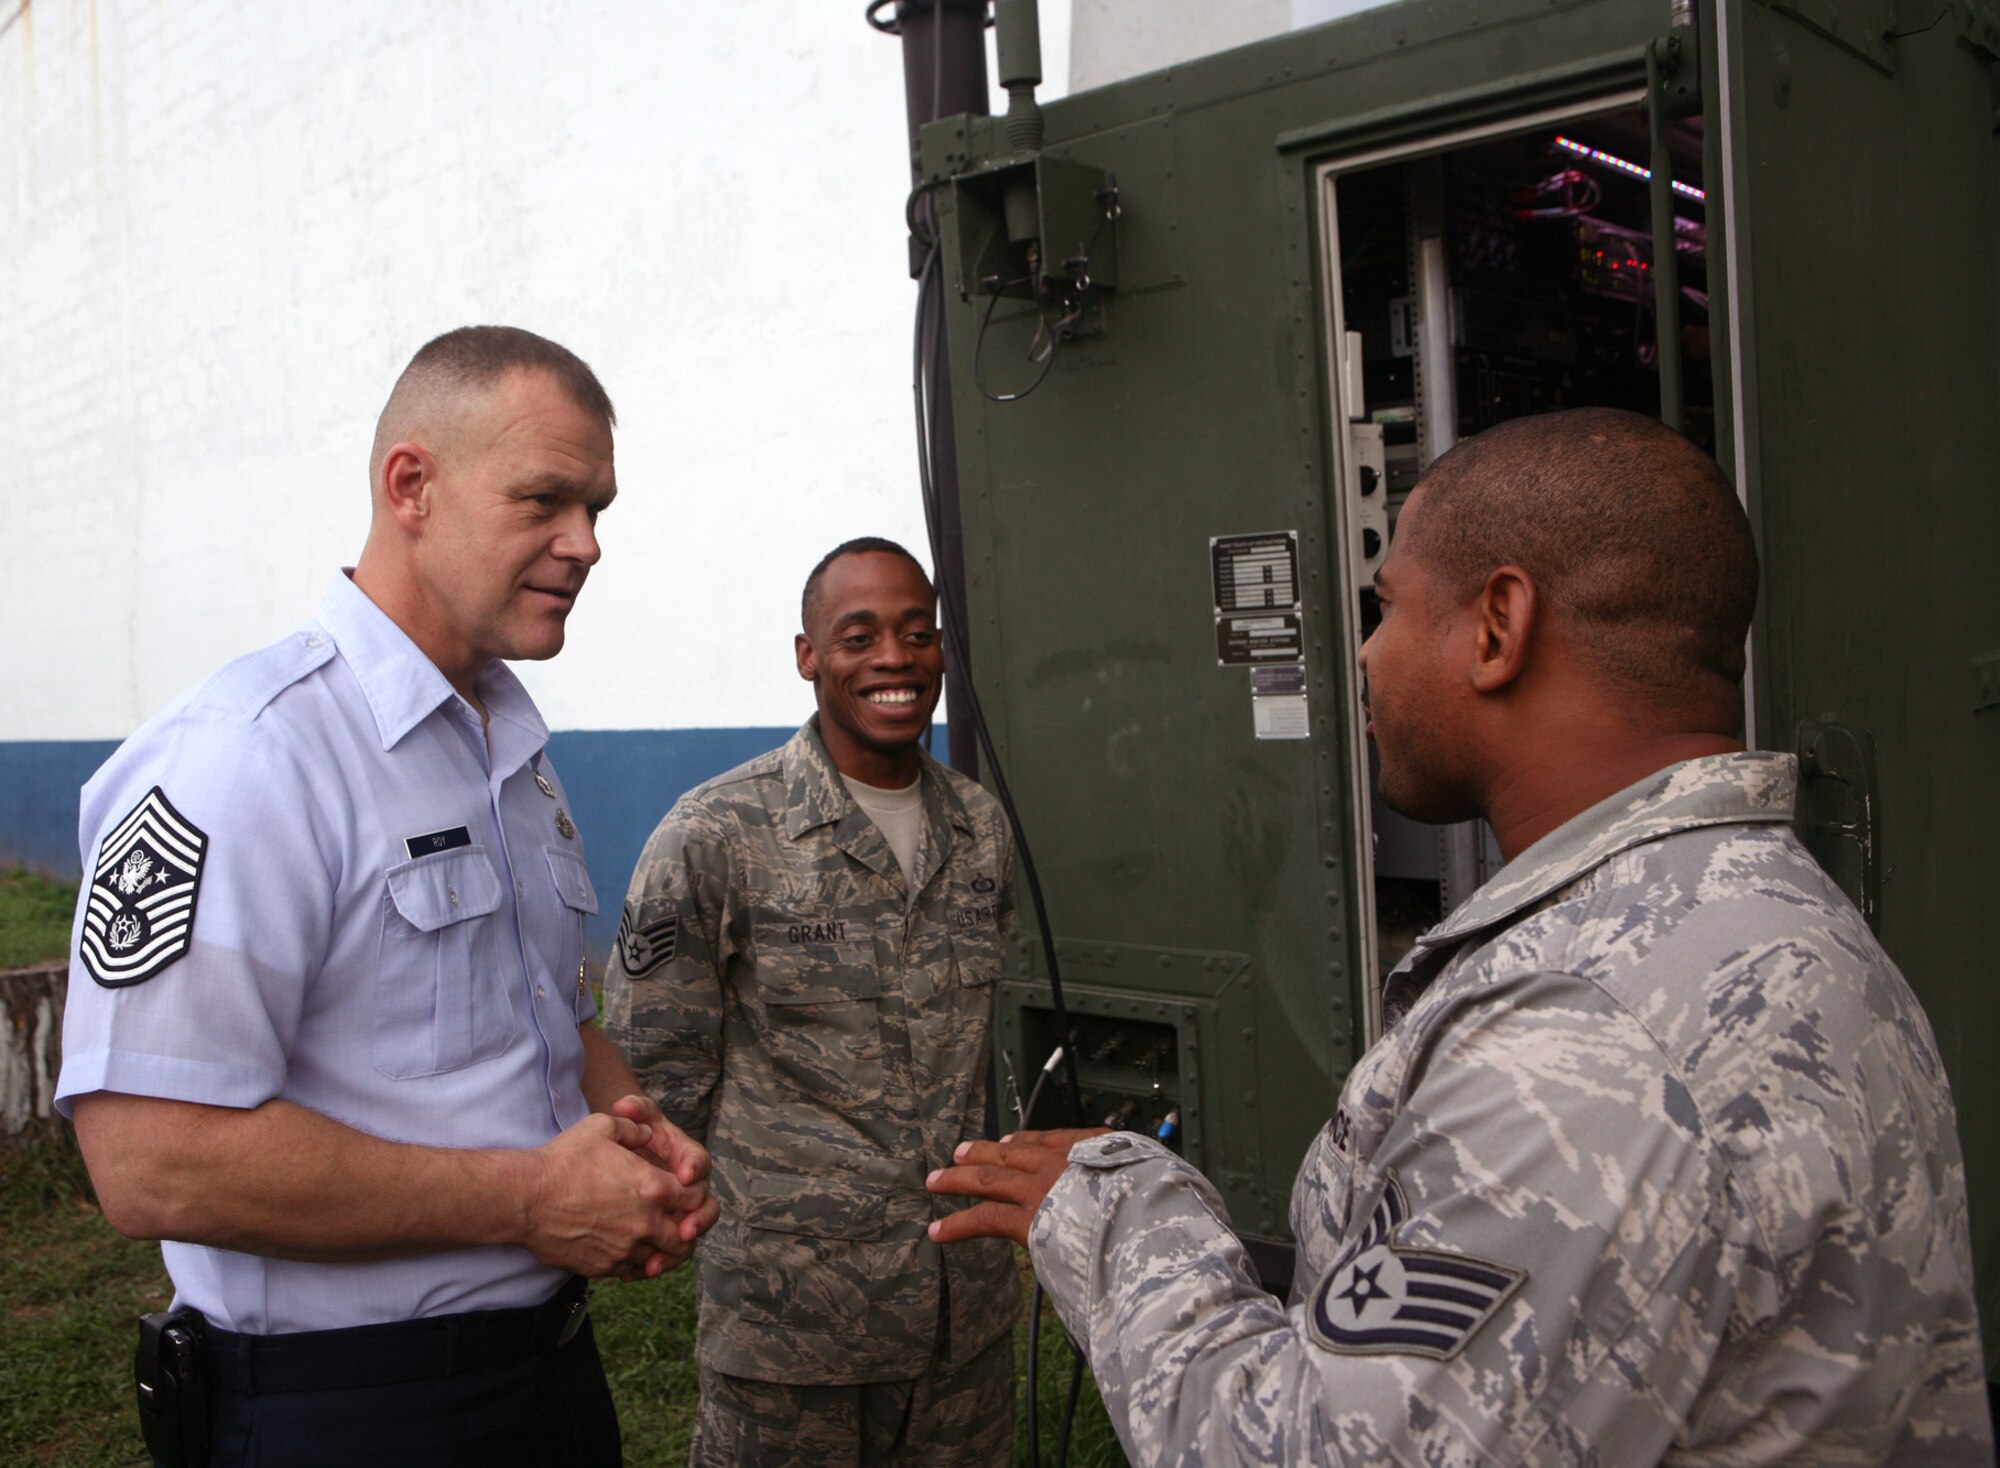 Chief Master Sgt. of the Air Force James A. Roy speaks to Staff Sgt. Leighton Grant (center) and Staff Sgt. Rodney Hawkins during a visit with Airmen of the 612th Air Expeditionary Communications Squadron deployed at Capt.Juan Delgado Air Base during Fuerzas Aliadas PANAMAX 2009 Sept. 19, 2009, in Panama City, Panama. The exercise is a multinational exercise with 20 participating countries tailored to the defense of the Panama Canal, involving more than 4,500 personnel from the U. S. Southern Command area of focus. (U.S. Navy photo/Petty Officer 1st Class David P. Coleman) 